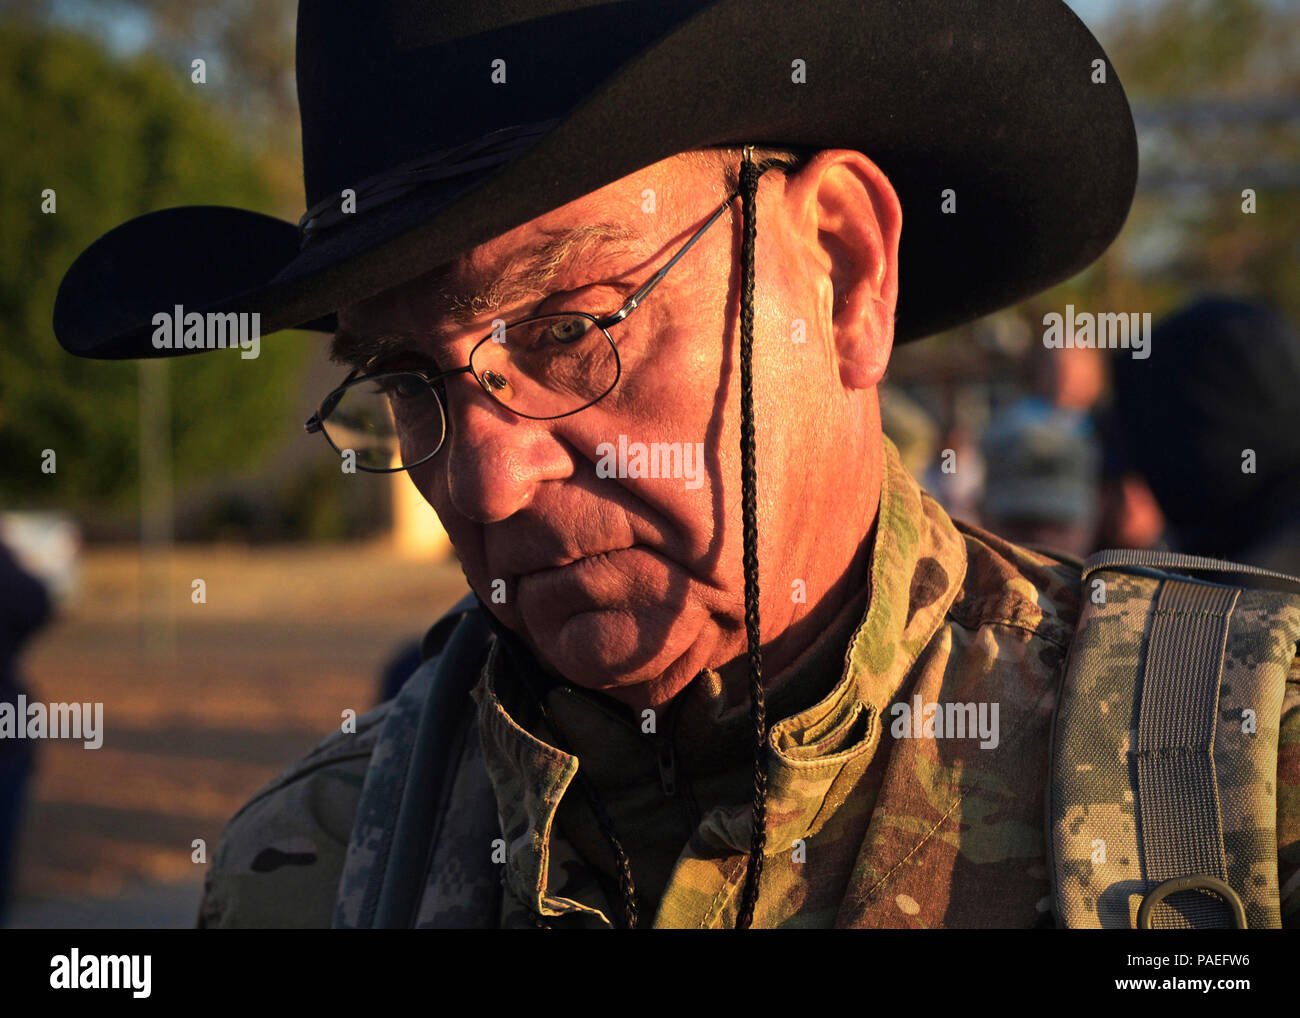 A participant in the Bataan Memorial Death March begins his march at White Sands Missile Range, New Mexico, March 20, 2016. The Bataan Memorial Death March honors a special group of World War II heroes. These service members were responsible for the defense of the islands of Luzon, Corregidor and the harbor defense forts of the Philippines. On April 9, 1942, tens of thousands of American and Filipino service members surrendered to Japanese Forces, and were then marched for days through the Philippine jungles. In honor of their sacrifice, more than 6,500 people participated in the 26.2 mile mar Stock Photo